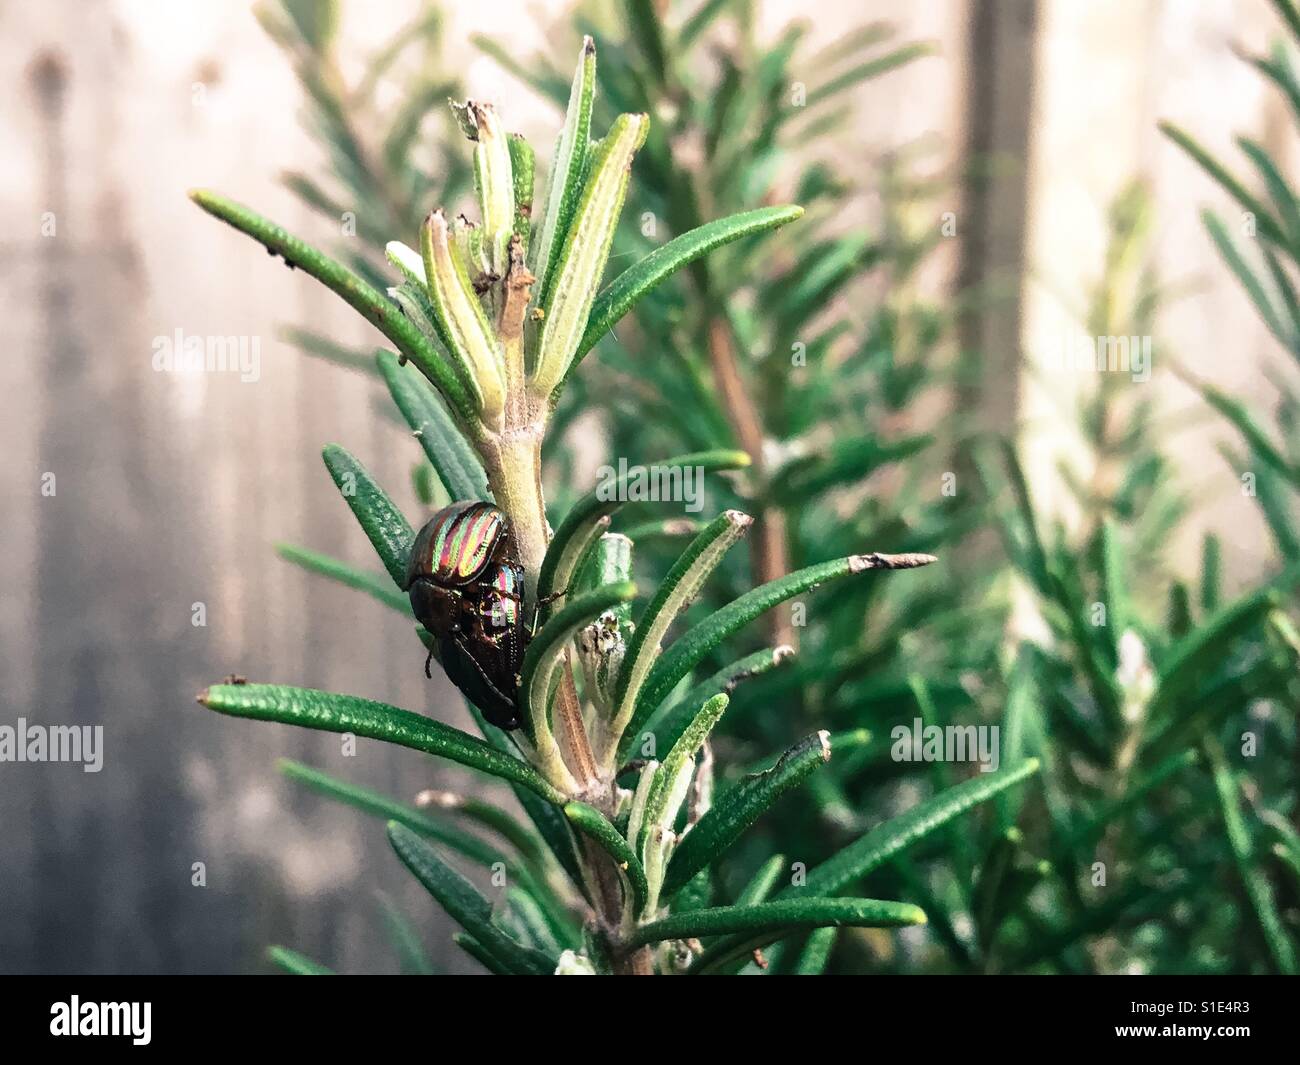 Rosemary beetles on a sprig of rosemary Stock Photo